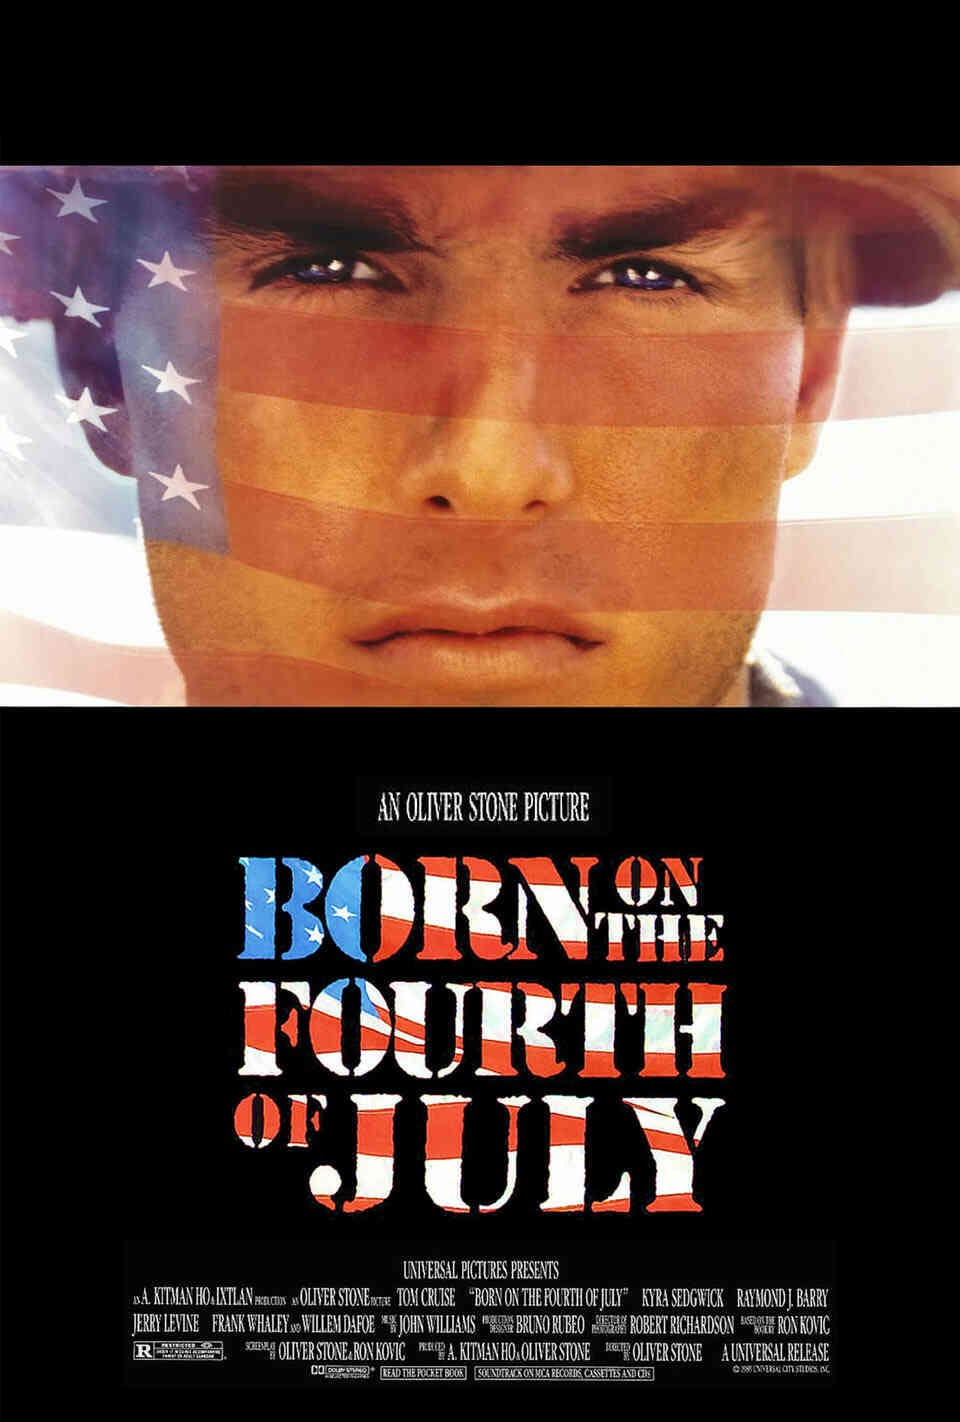 Read Born on the Fourth of July screenplay (poster)